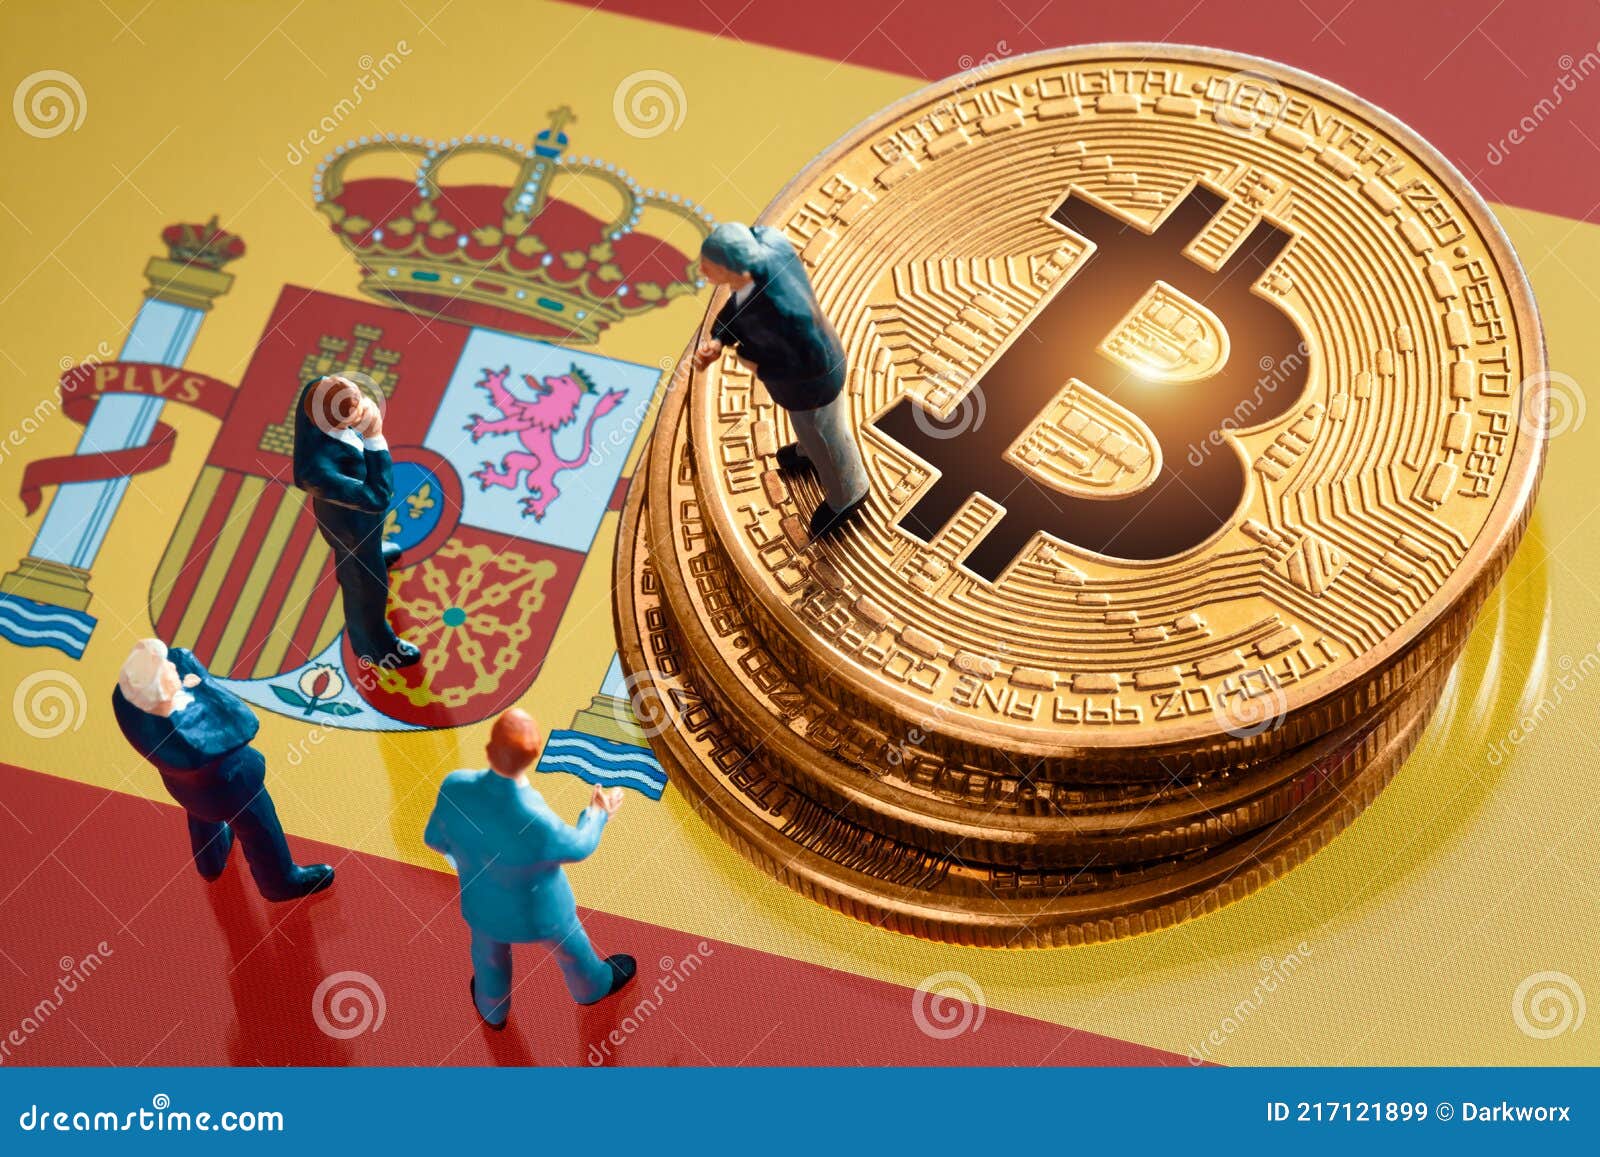 Premium Photo | Bitcoin spain on flag of spain. bitcoin news and legal situation in spain concept.